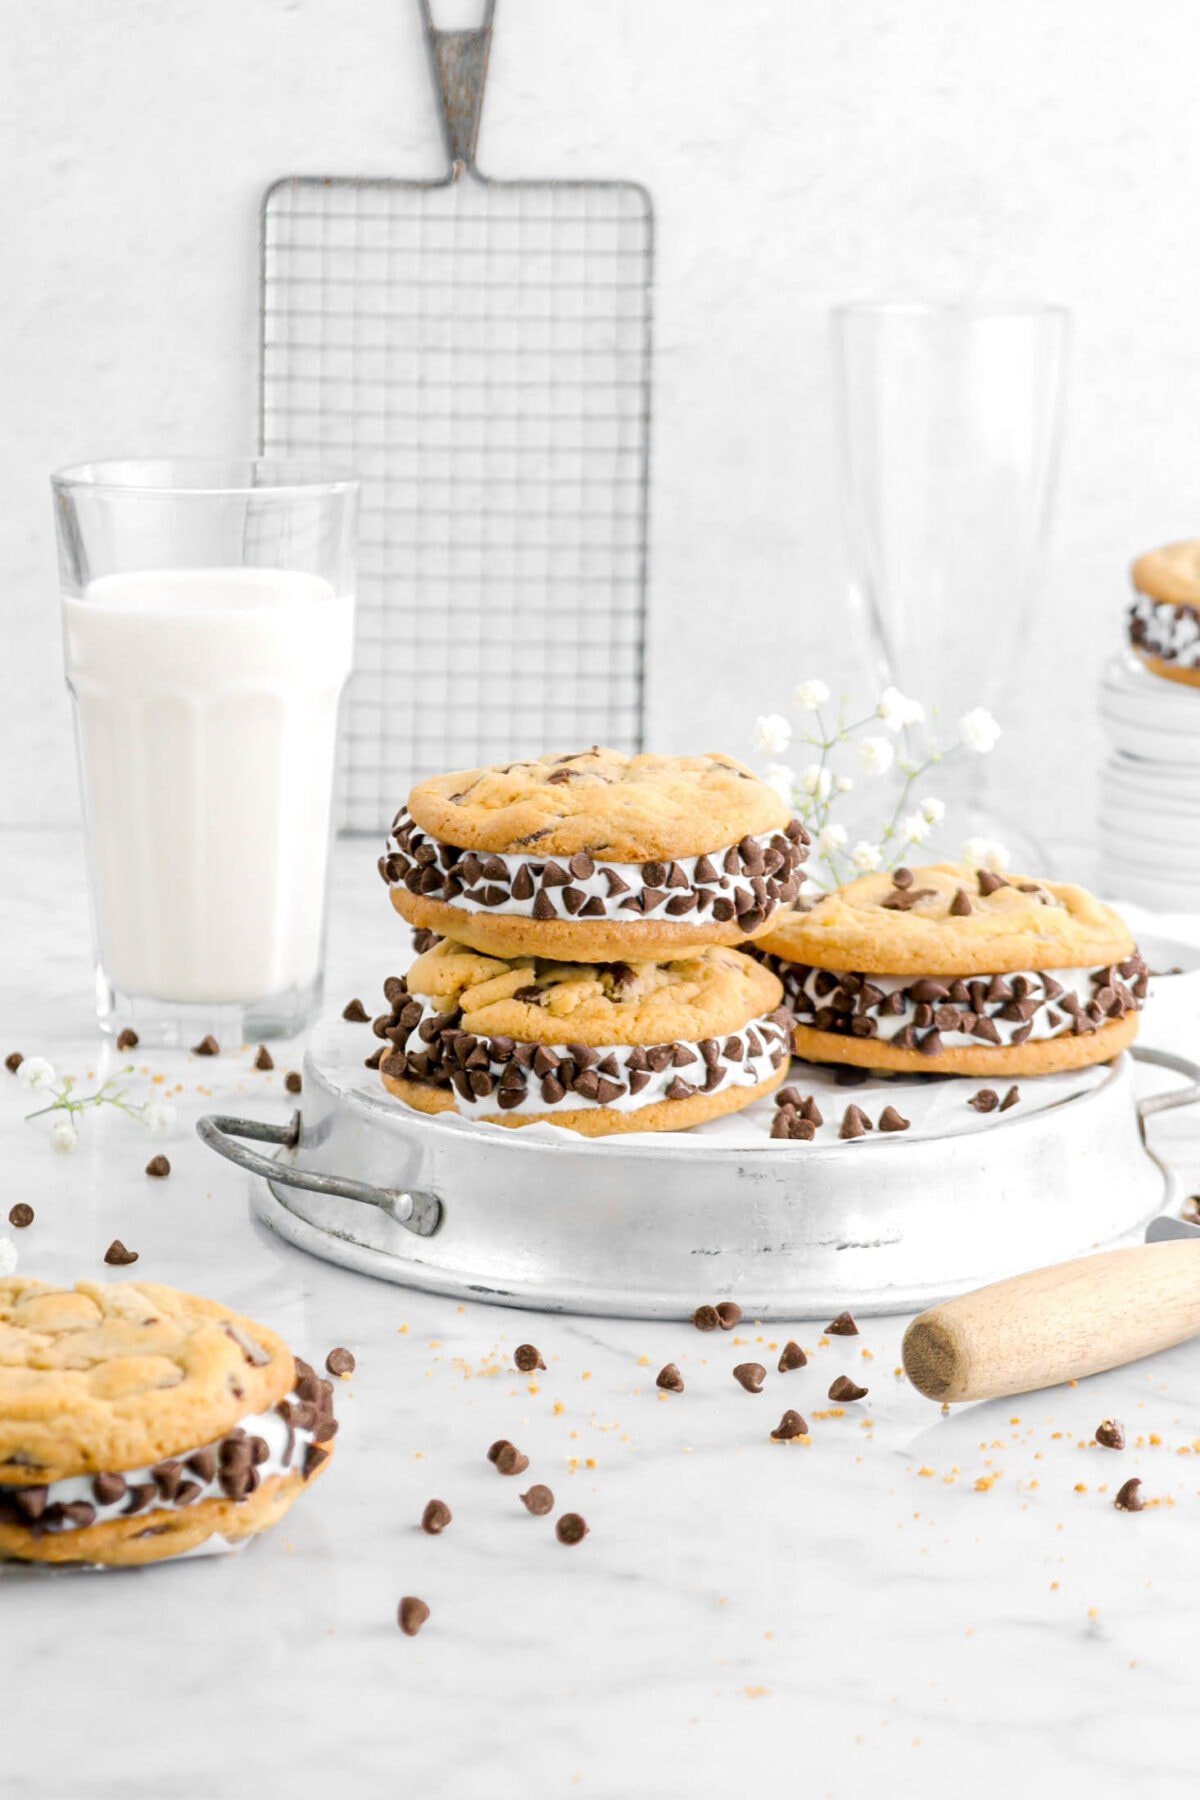 two stacked chocolate chip ice cream sandwich cookies on upside down pie plate with more ice cream sandwiches around, glass of milk, cooling rack, and milkshake glass behind